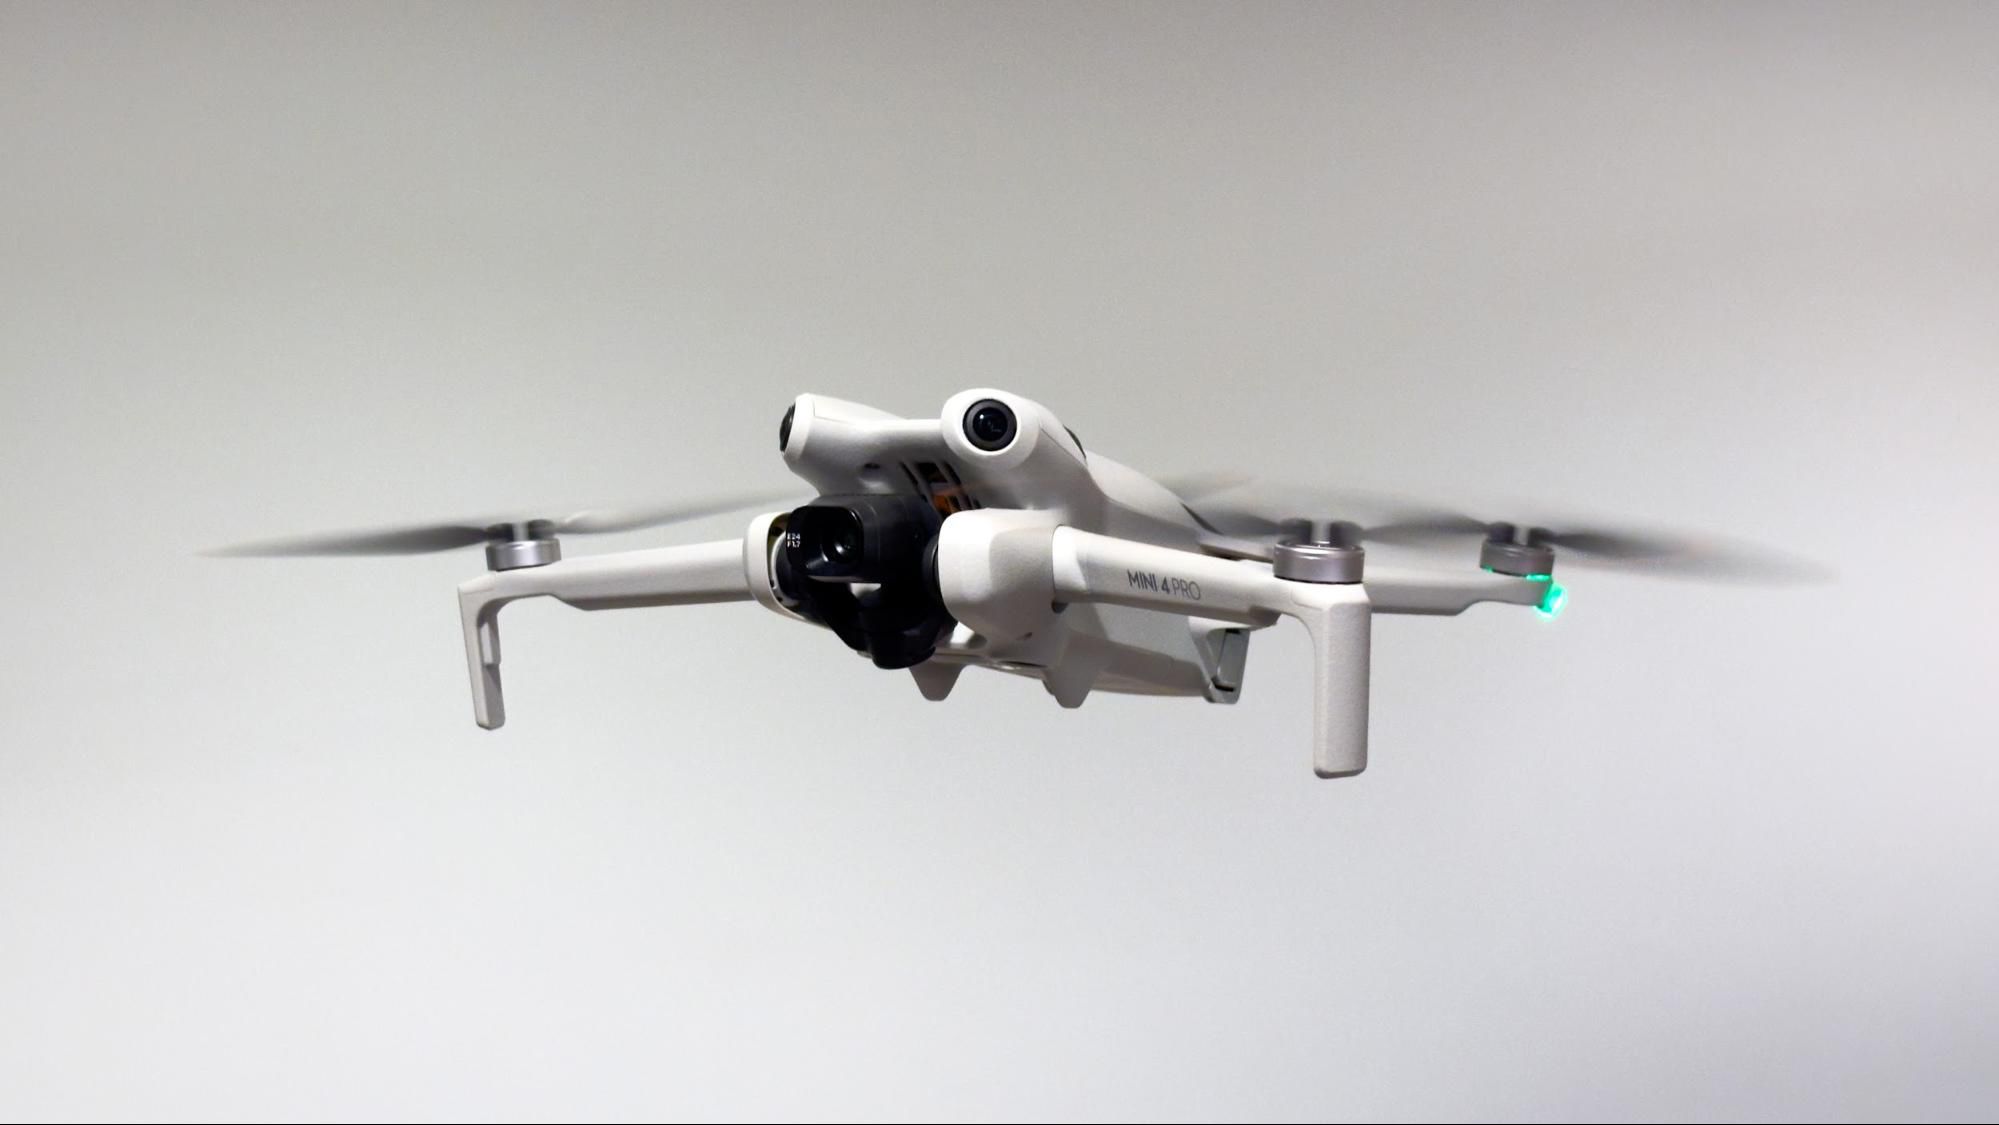 DJI Mini 3 Pro Review: The little drone that could